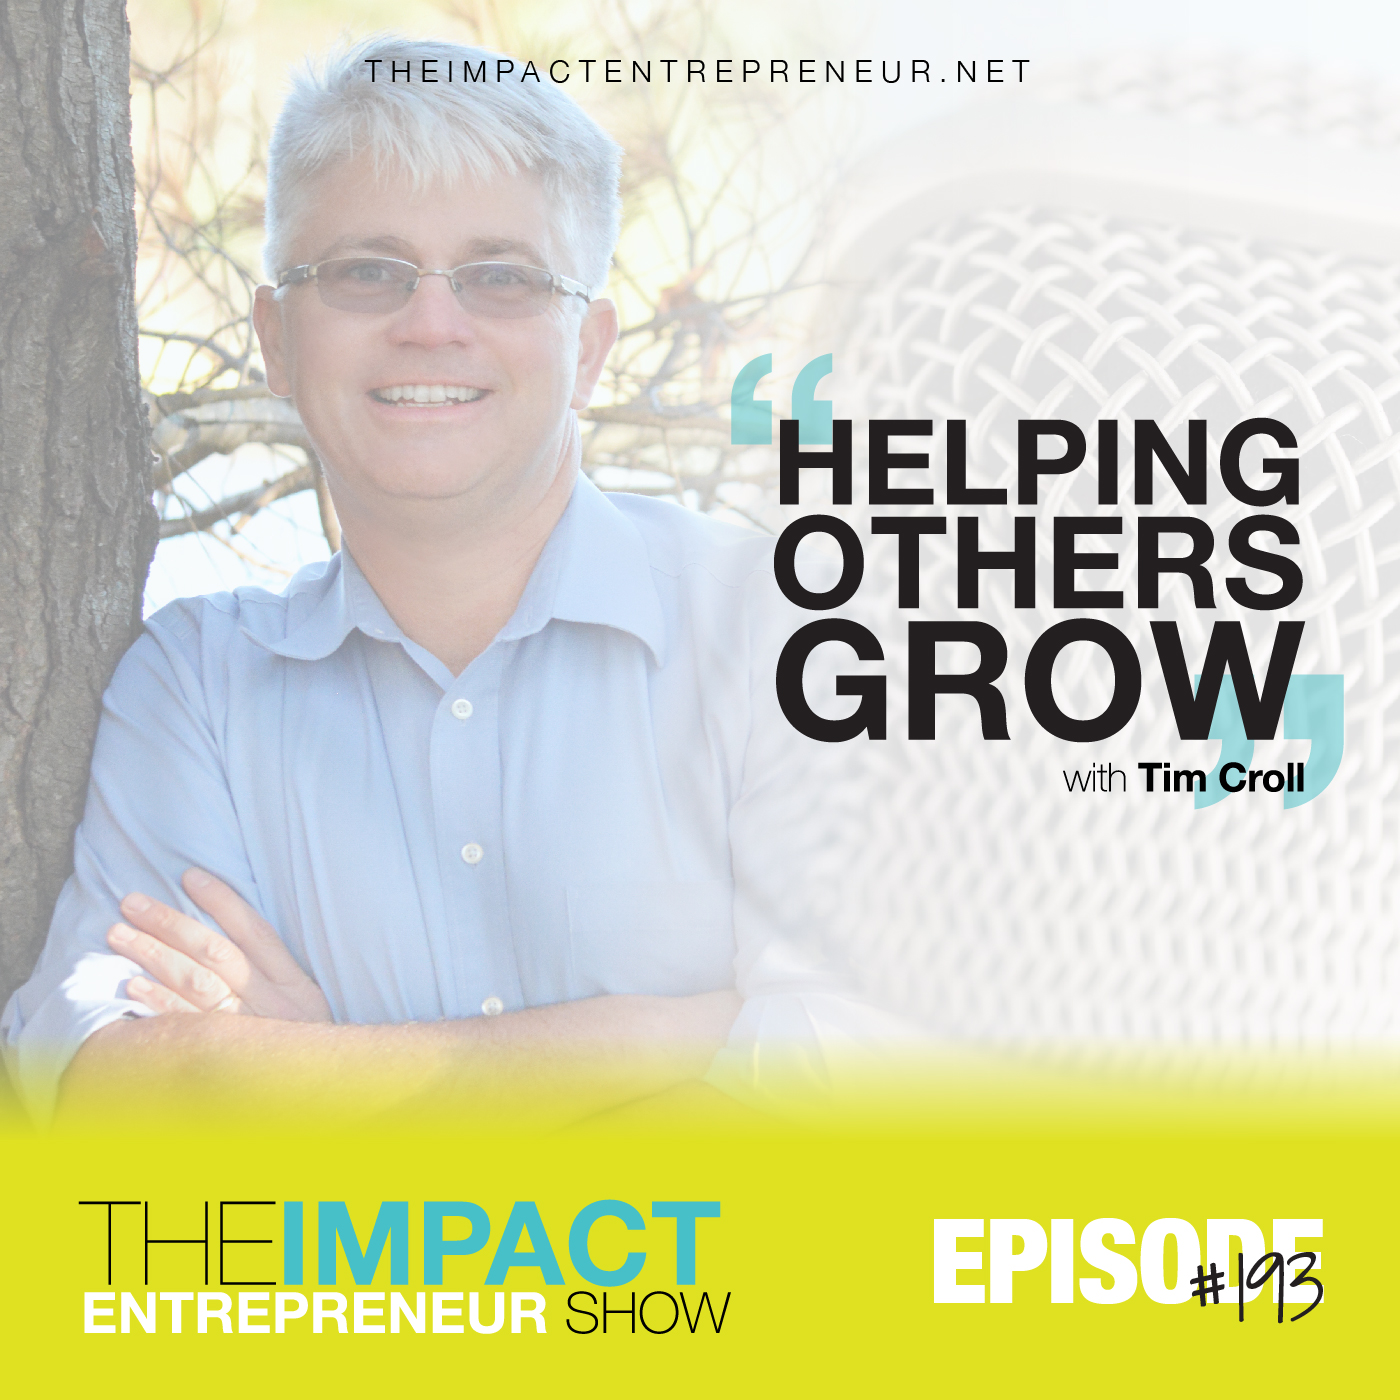 Ep. 193 - Helping Others Grow - with Tim Croll